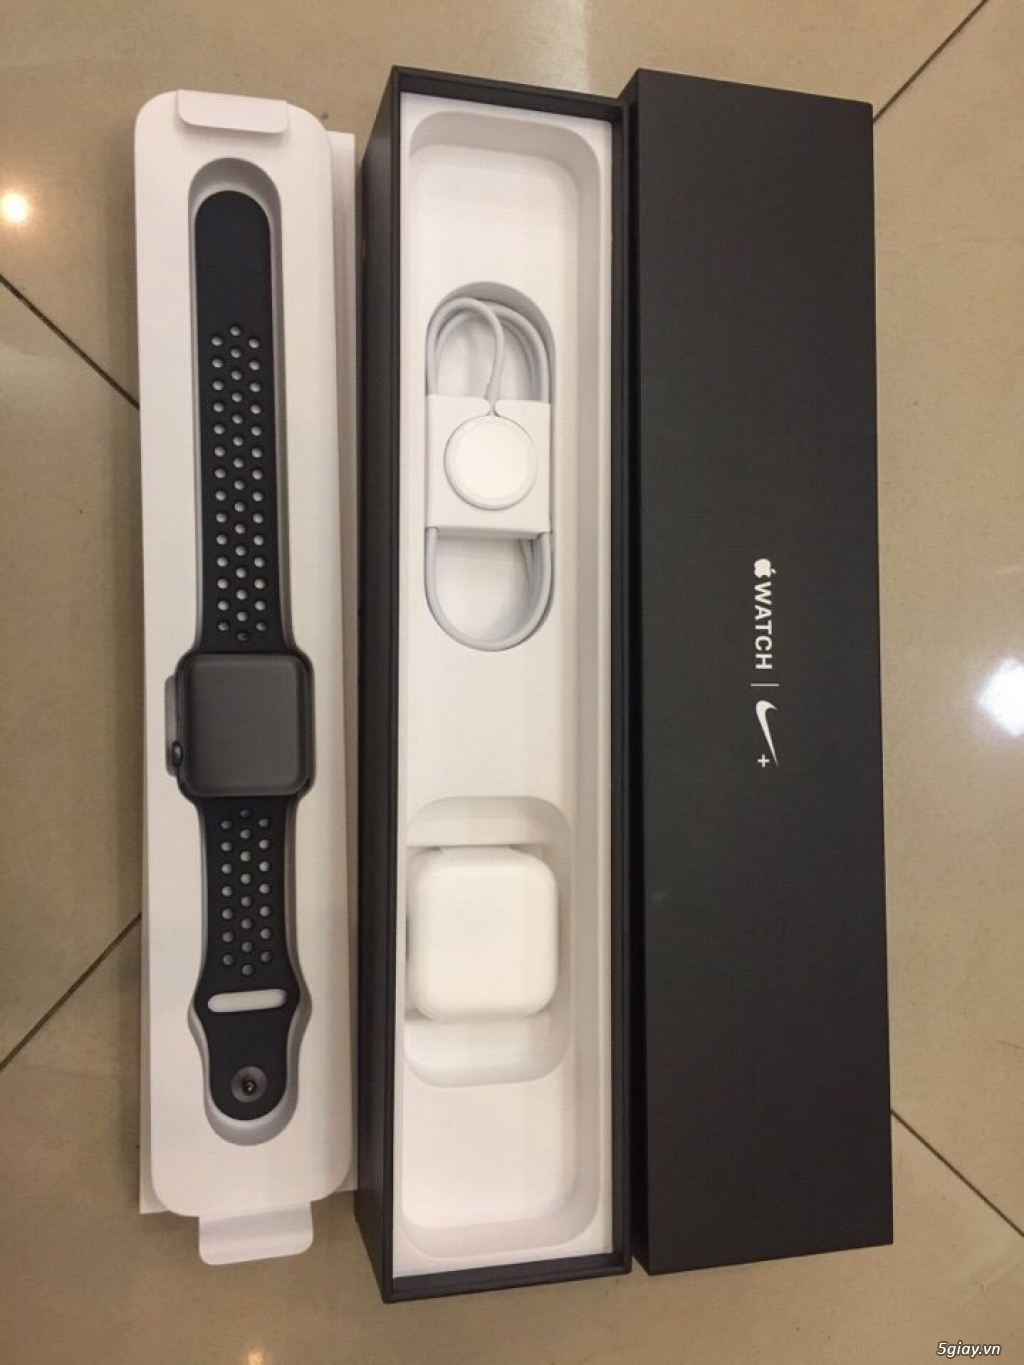 AppleWatch Series 2 42mm Space Gray Aluminum Nike Sport Band - 4